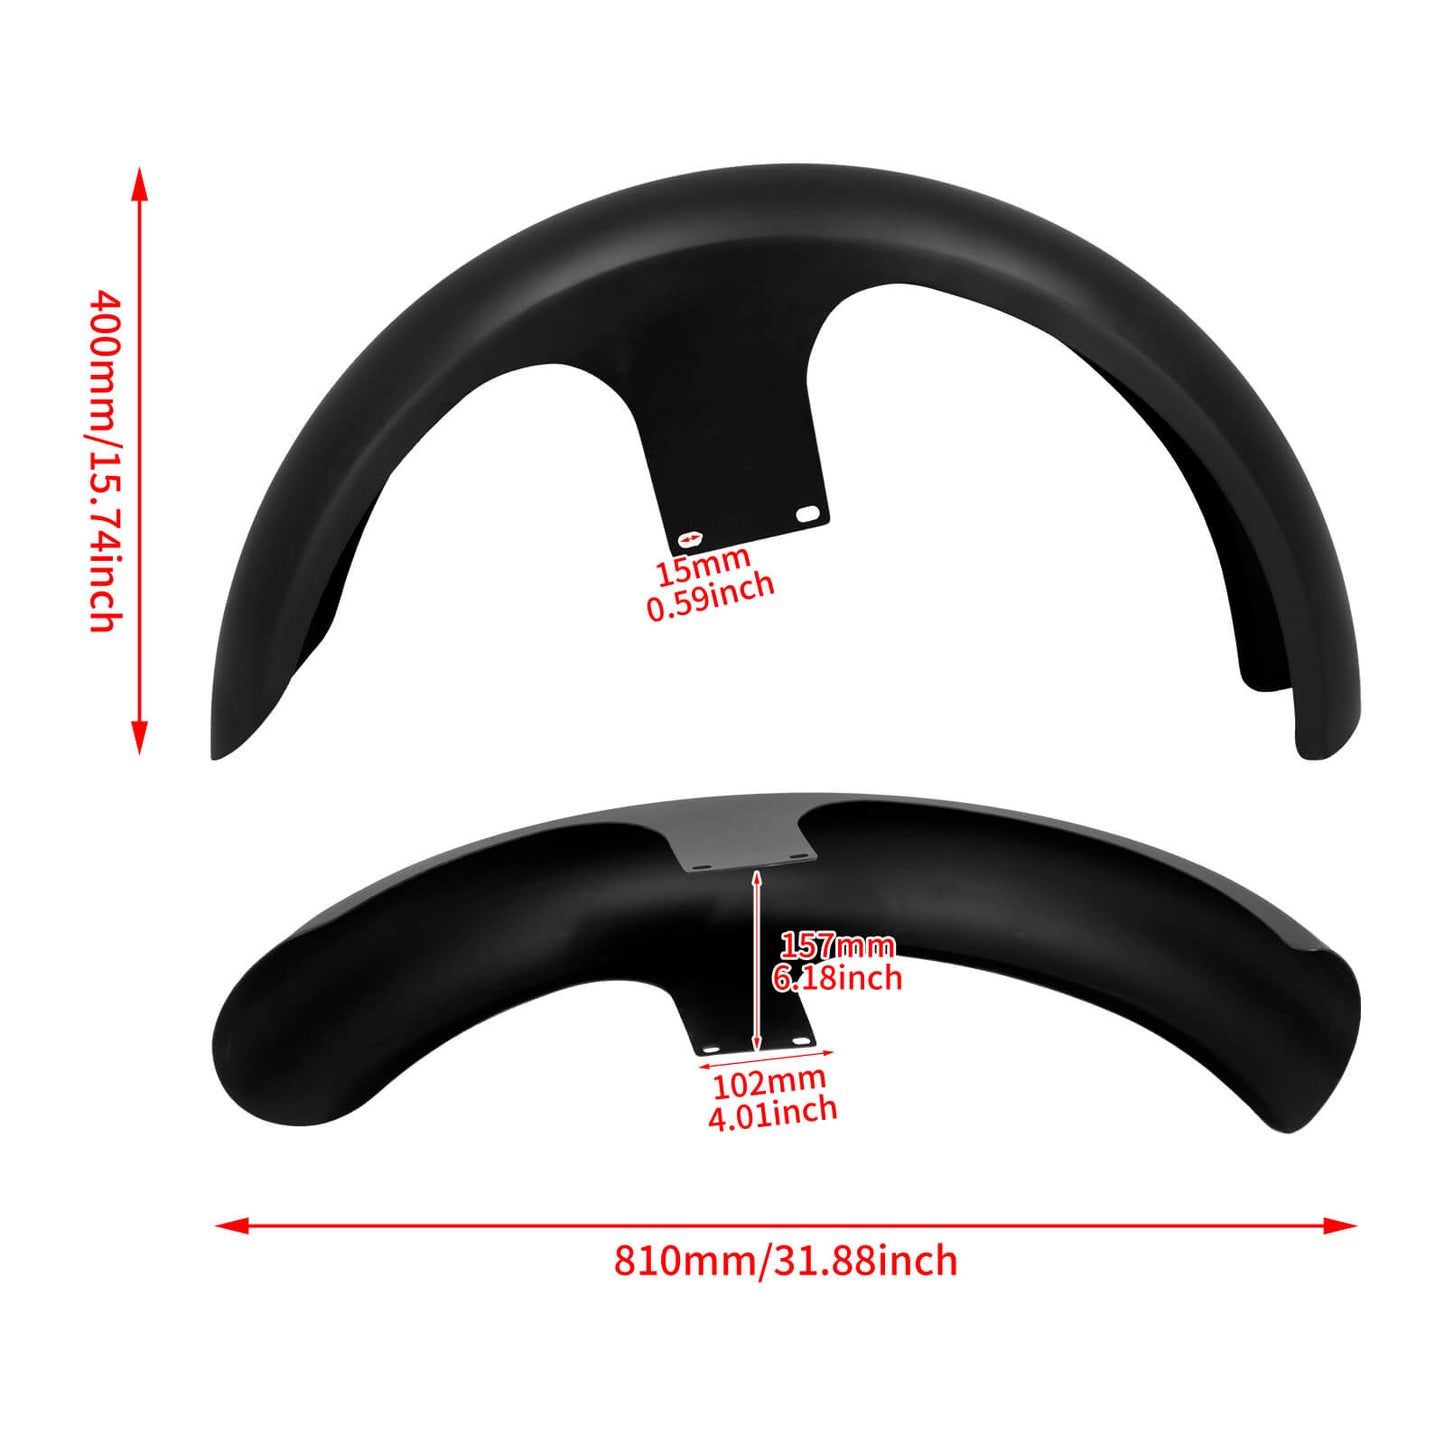 Mactions road glide 23 inches front fender gloss black CR026407